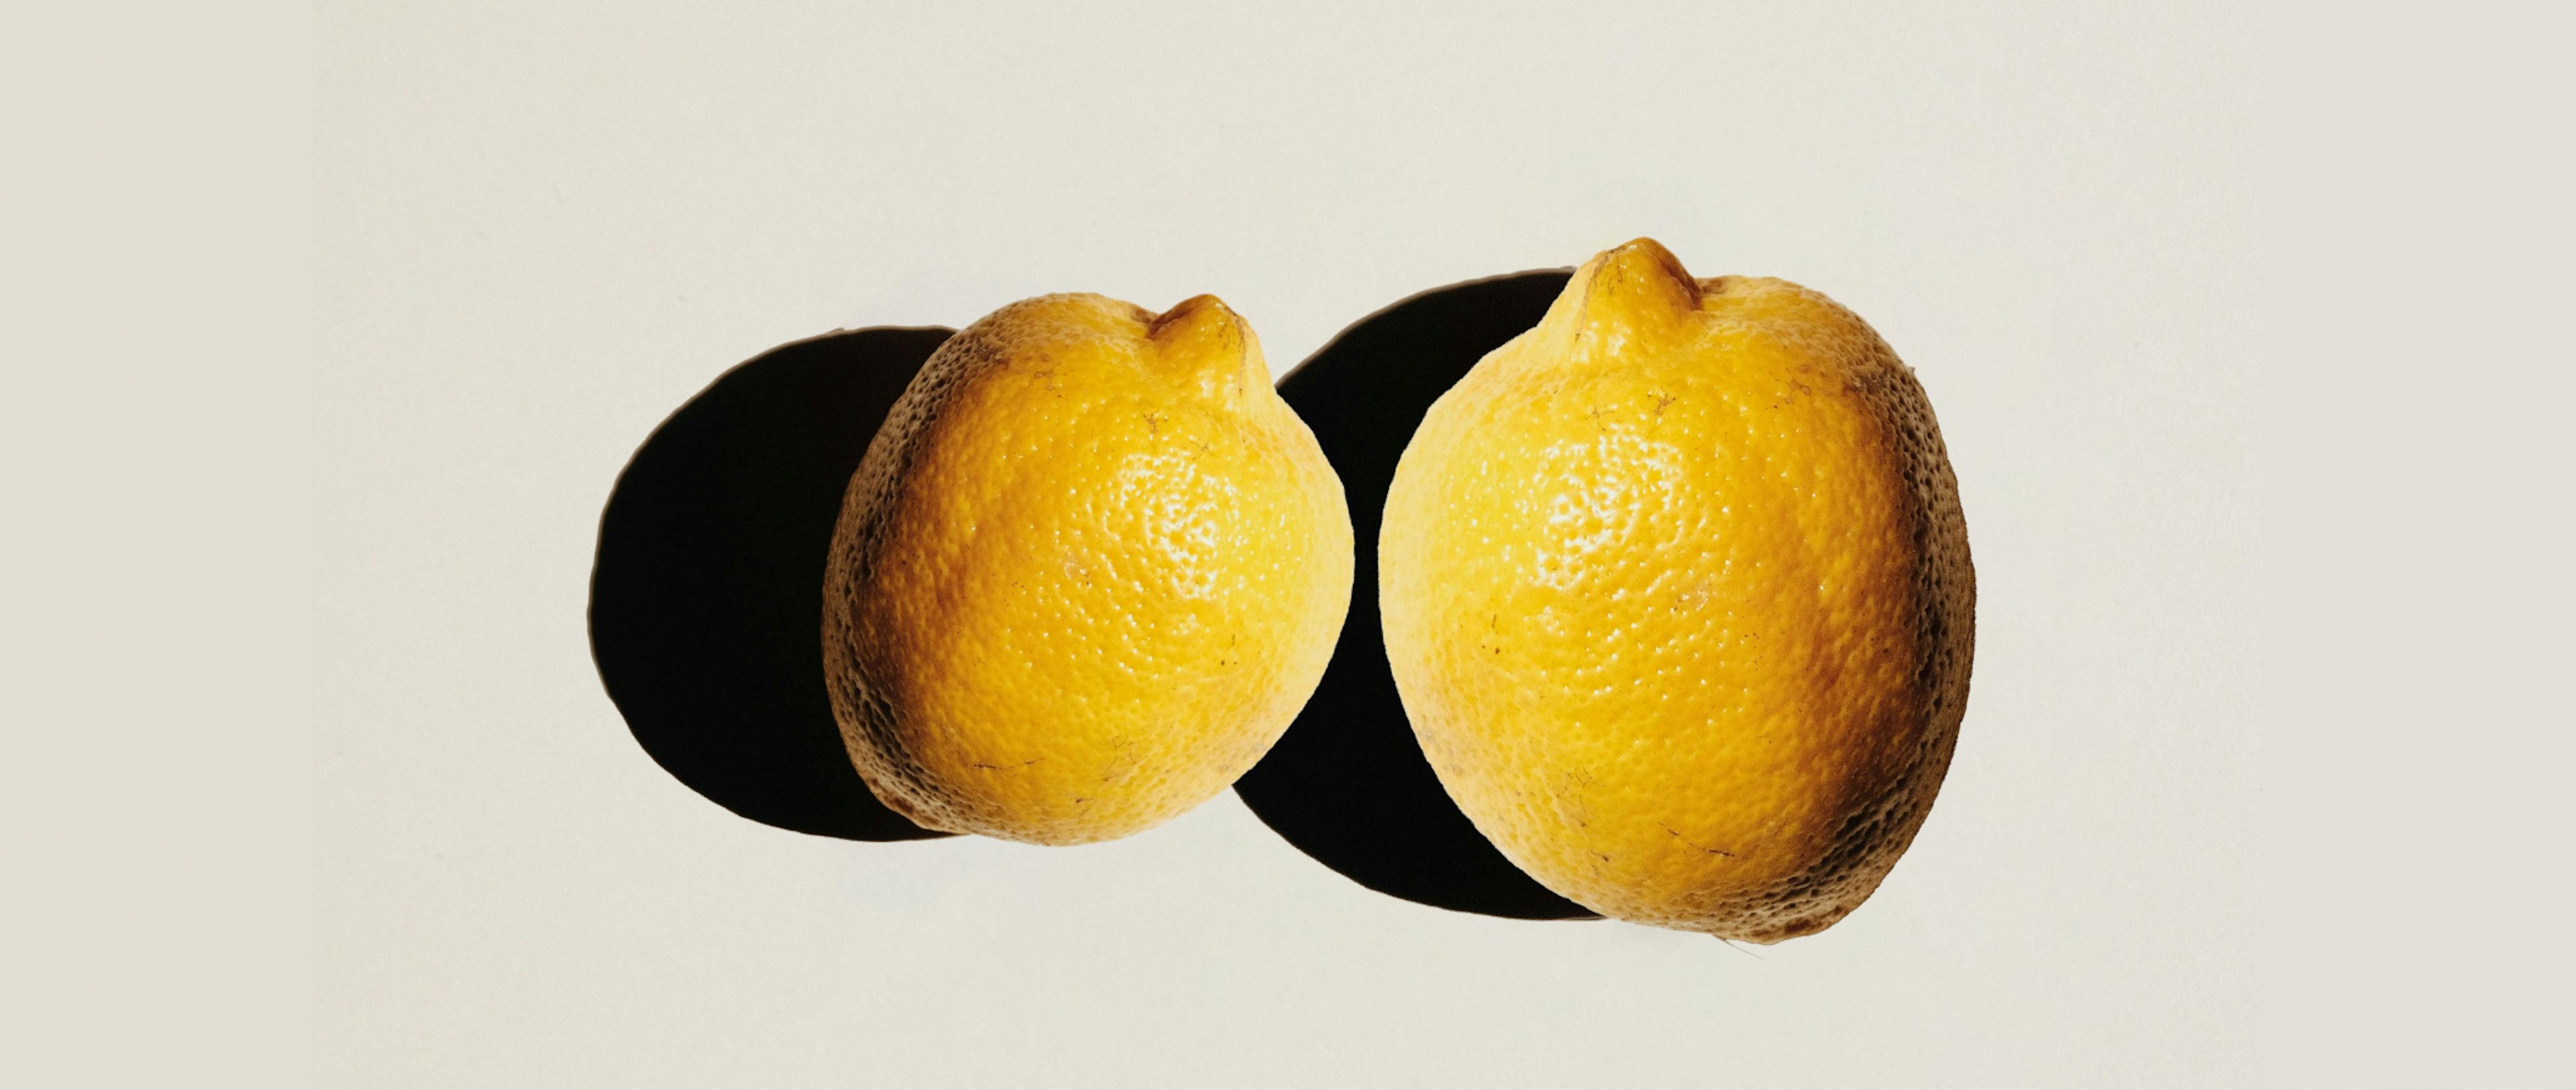 Two lemons of different sizes placed side by side.